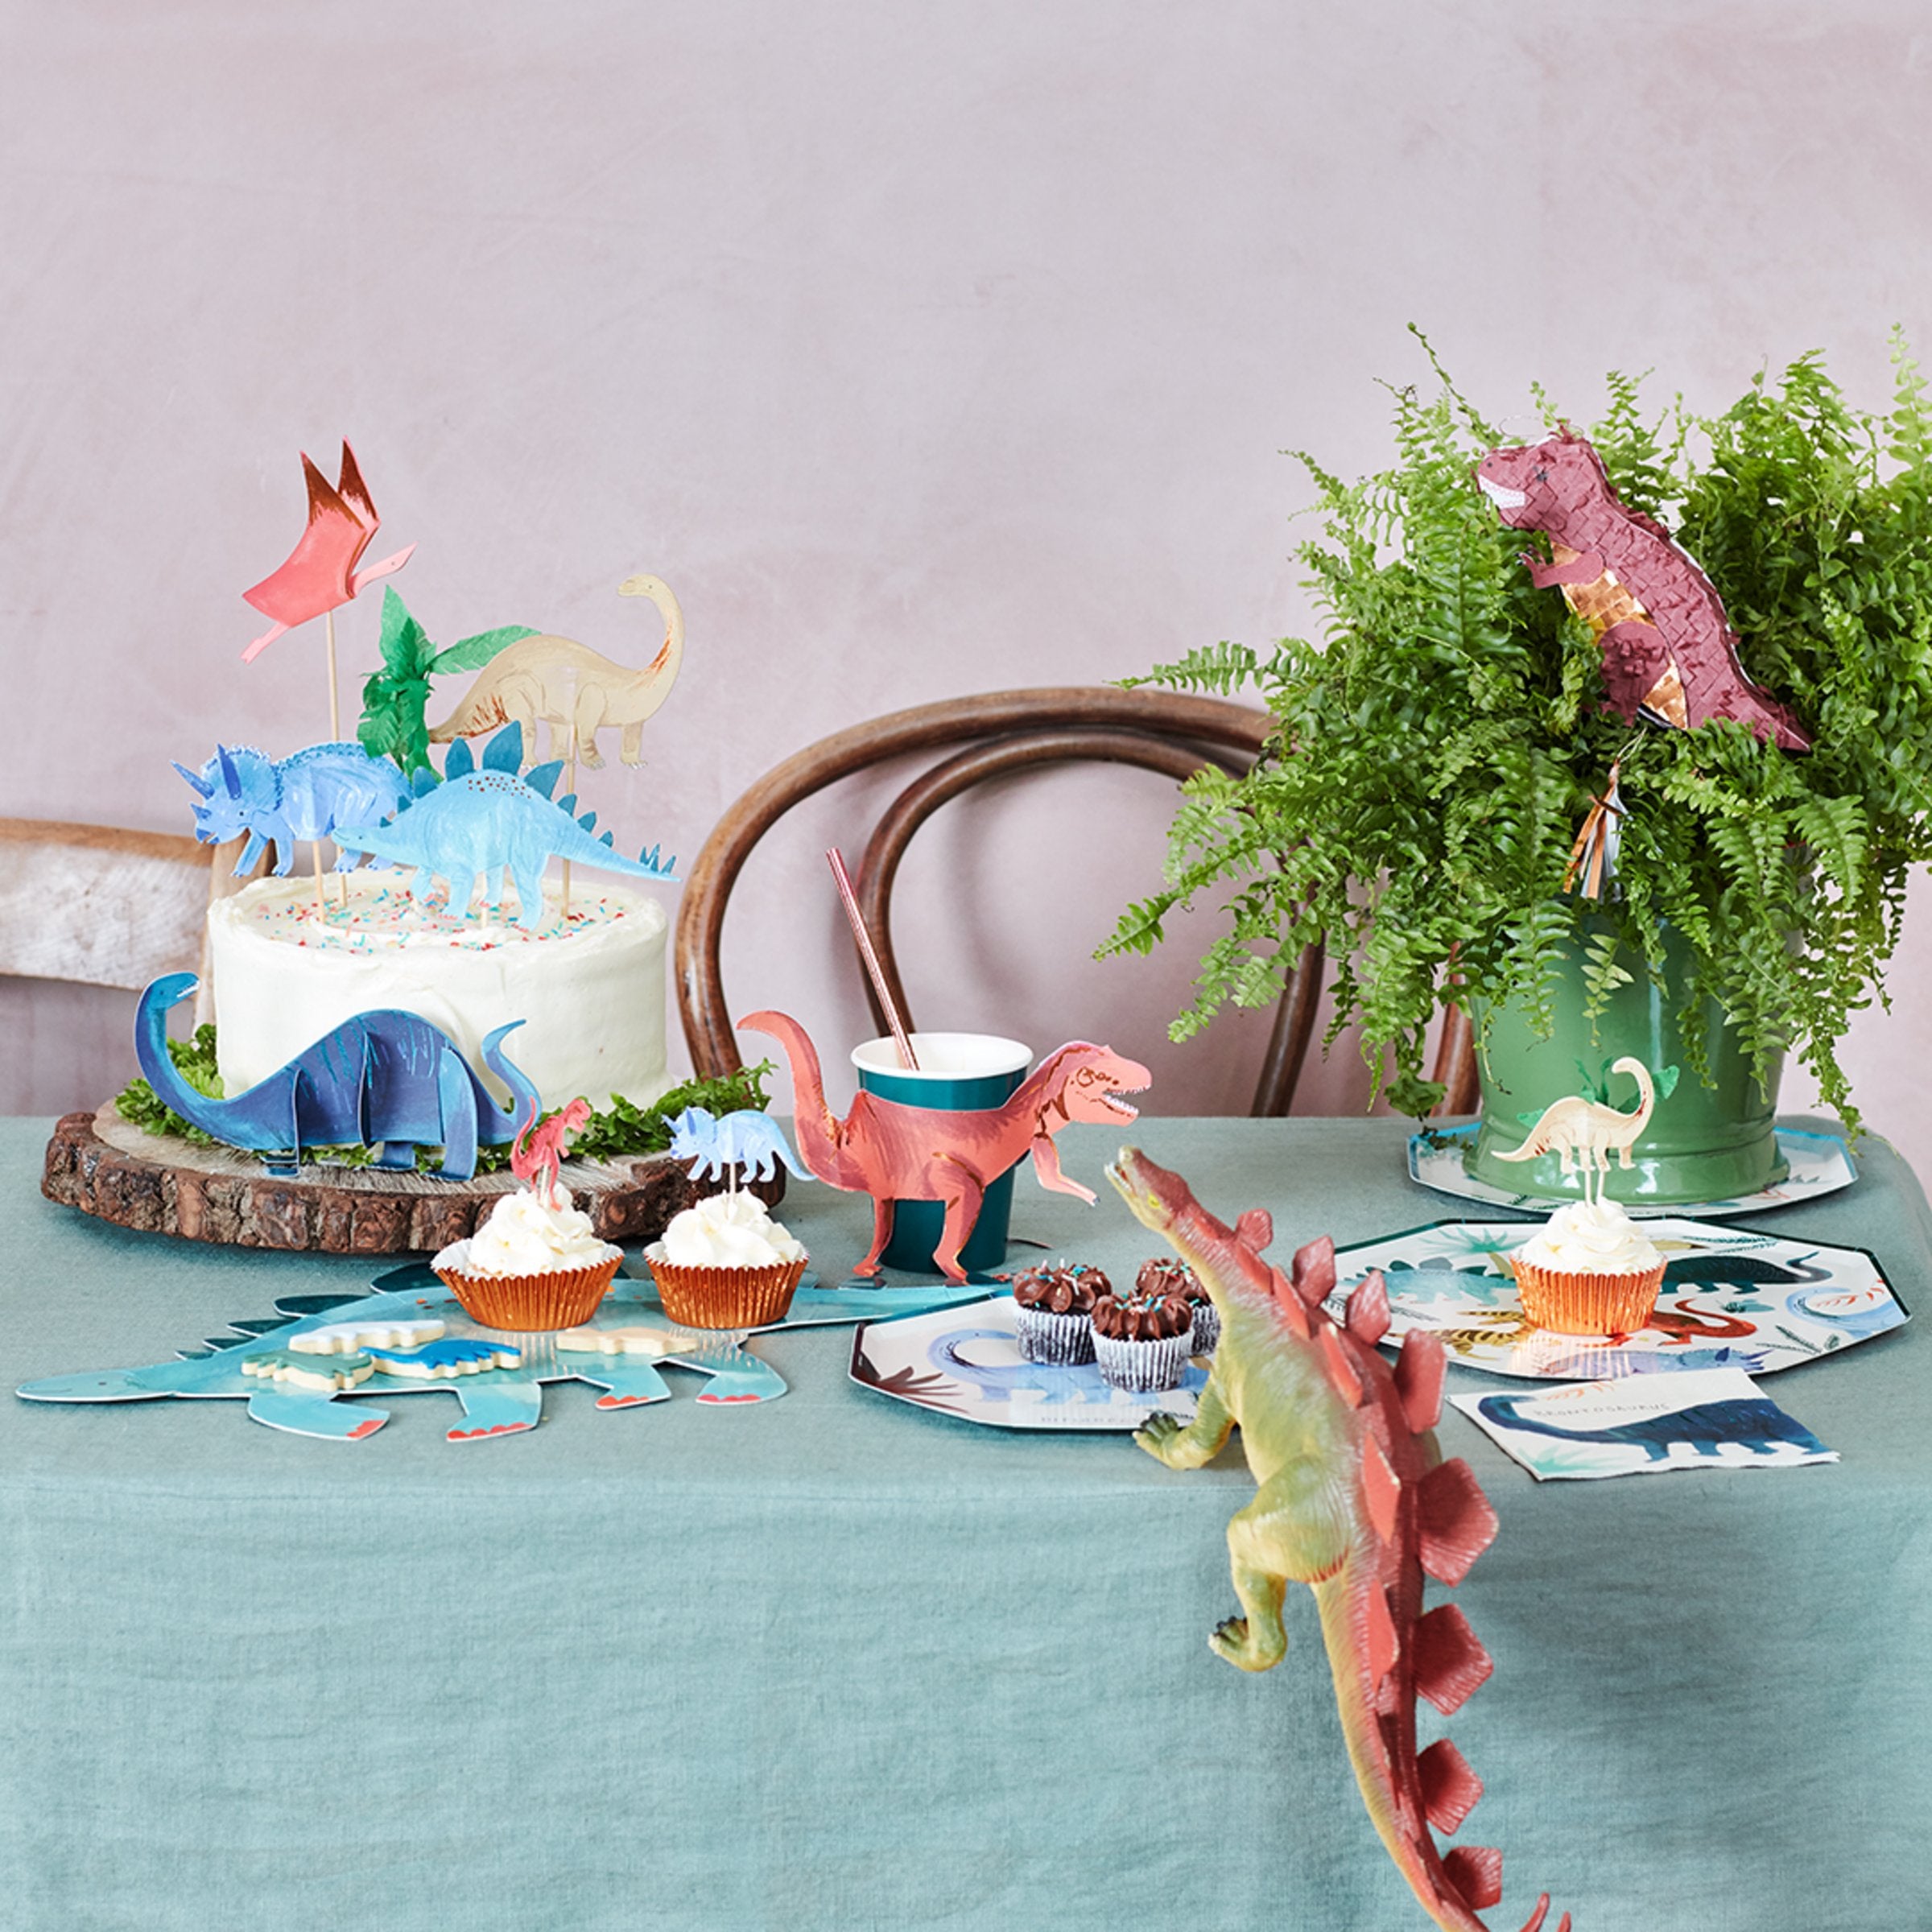 Our special dinosaur cake decorations, featuring 5 dinosaur toppers and a palm tree, are wonderful dinosaur party decorations.